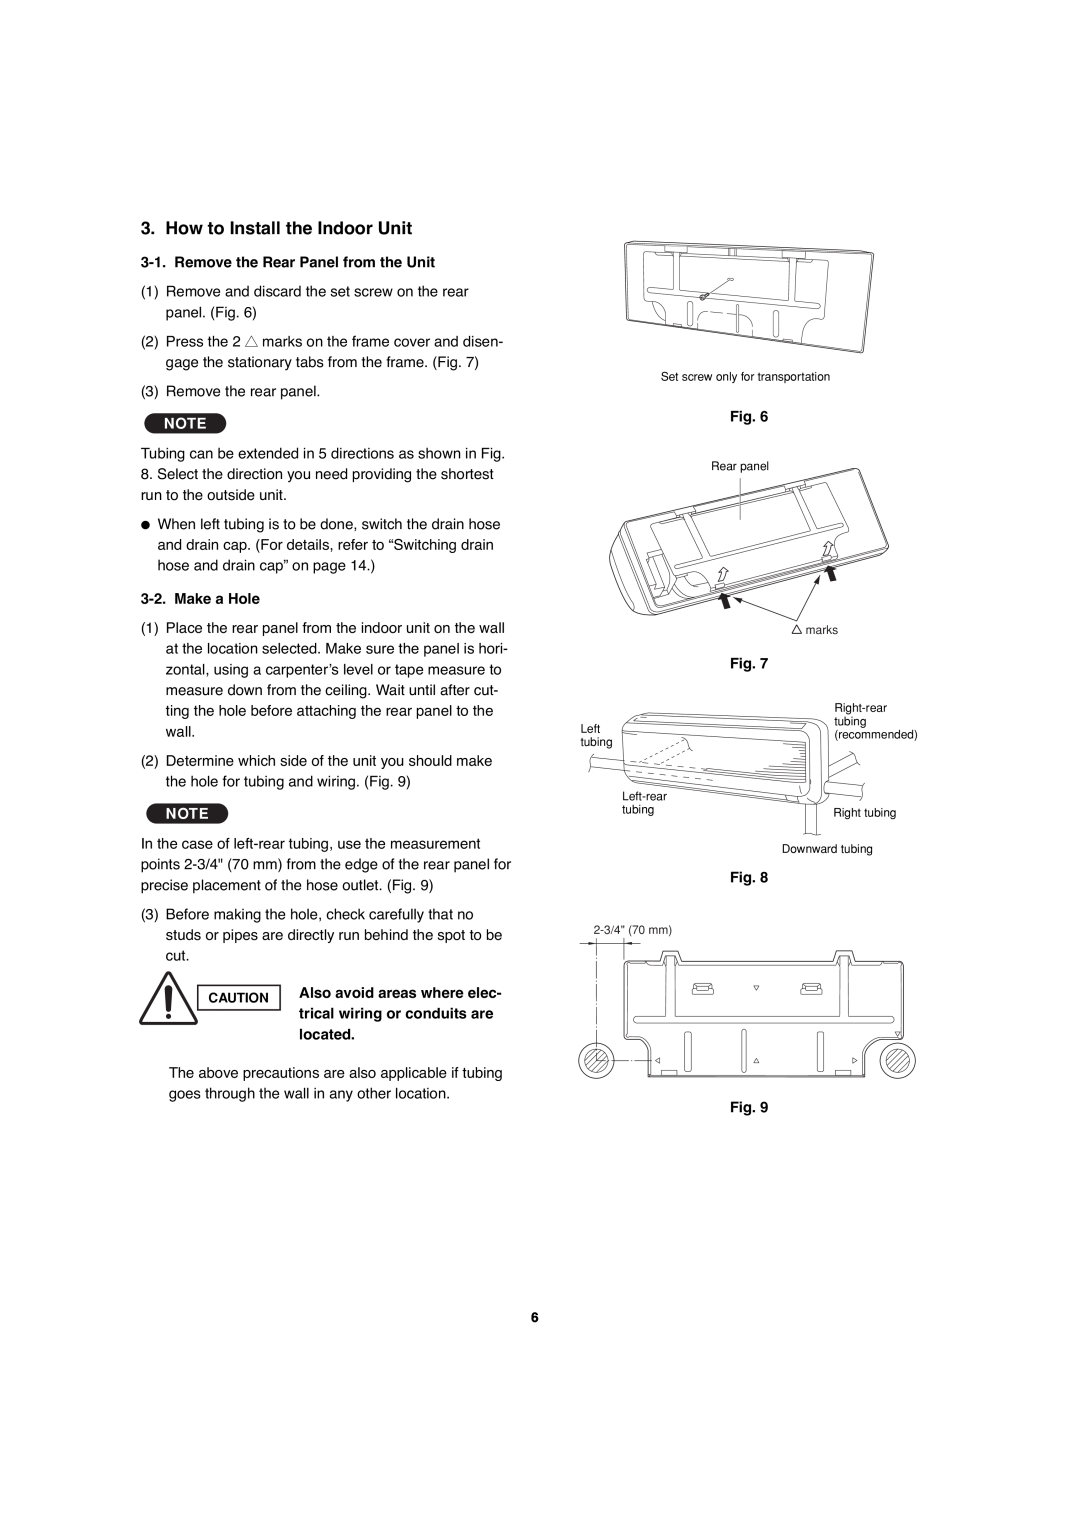 Sanyo CH0971, CH1271 How to Install the Indoor Unit, Remove the Rear Panel from the Unit, Make a Hole, located 